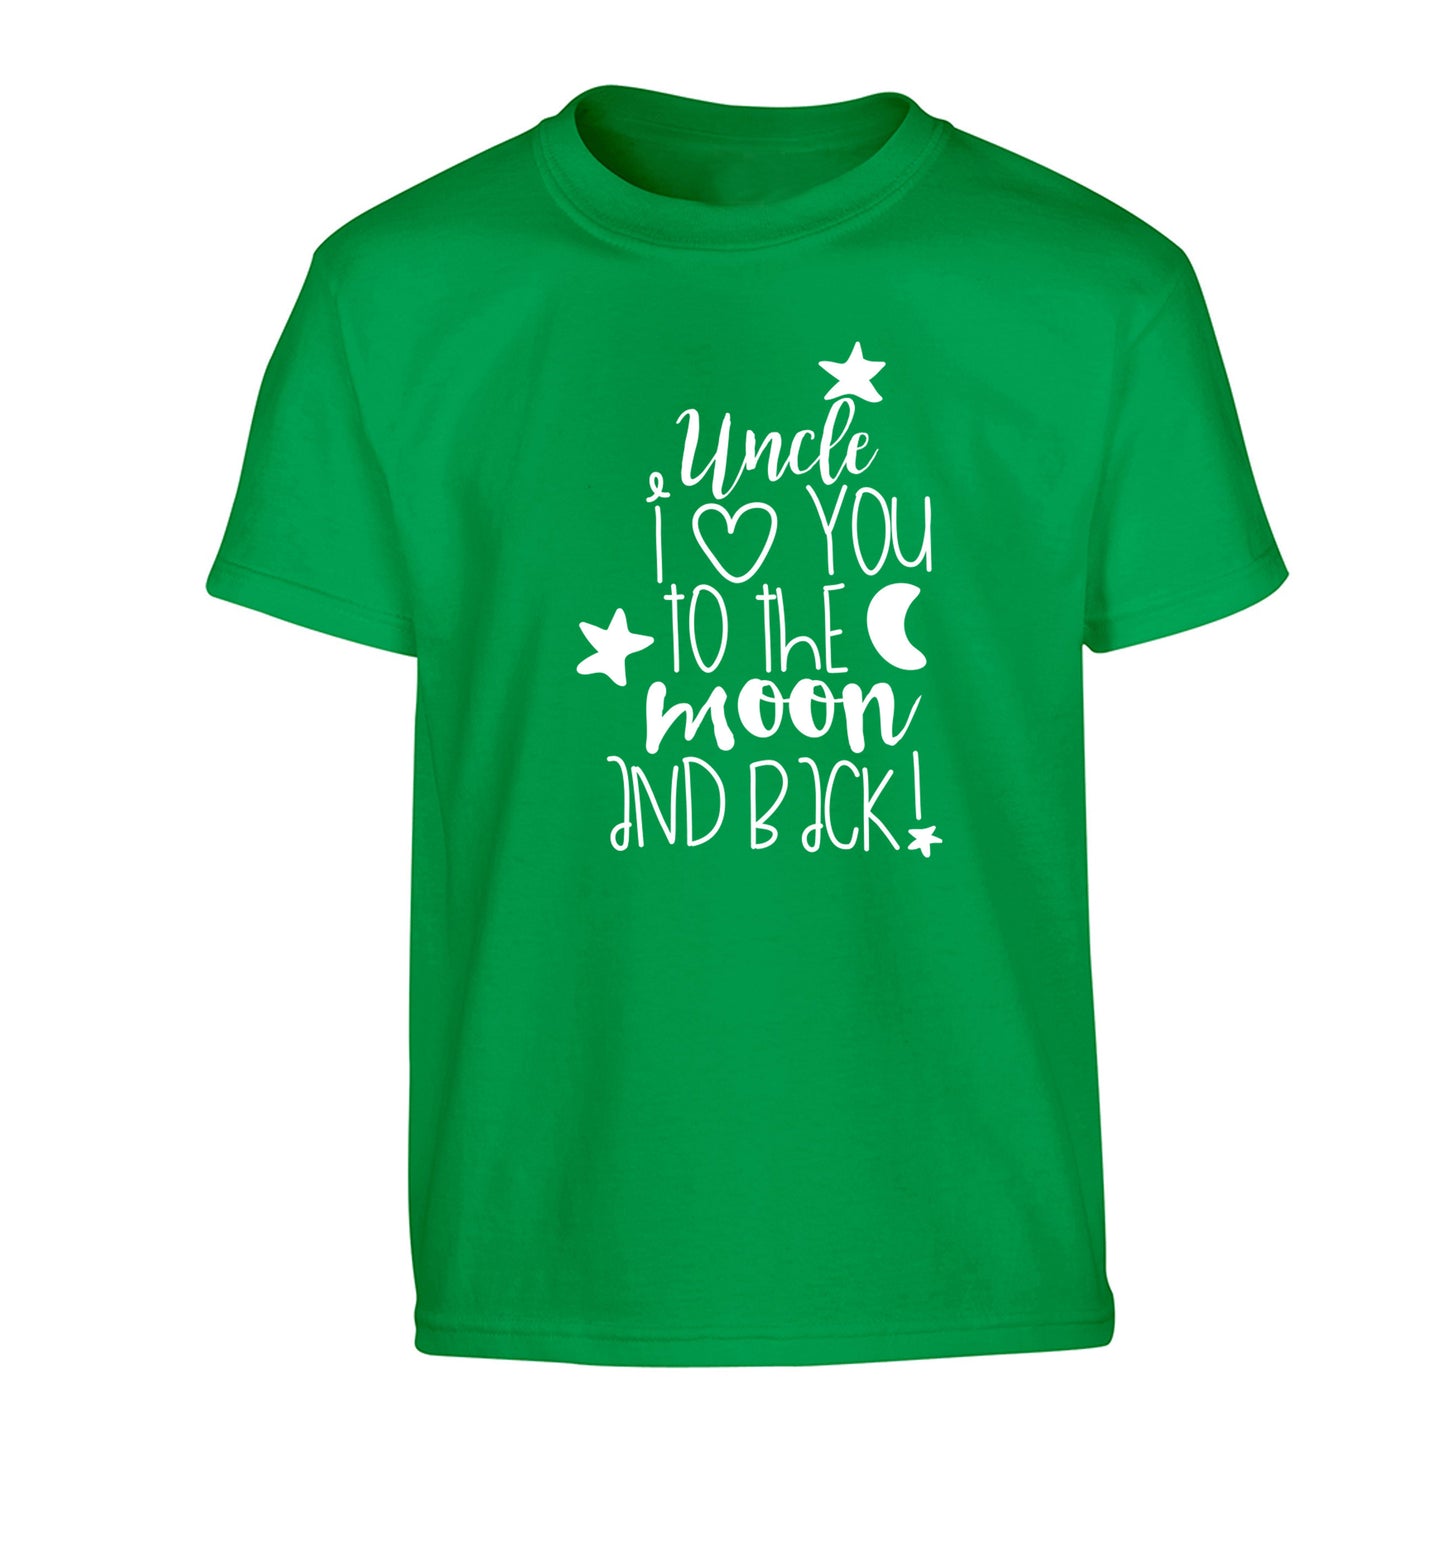 Uncle I love you to the moon and back Children's green Tshirt 12-14 Years